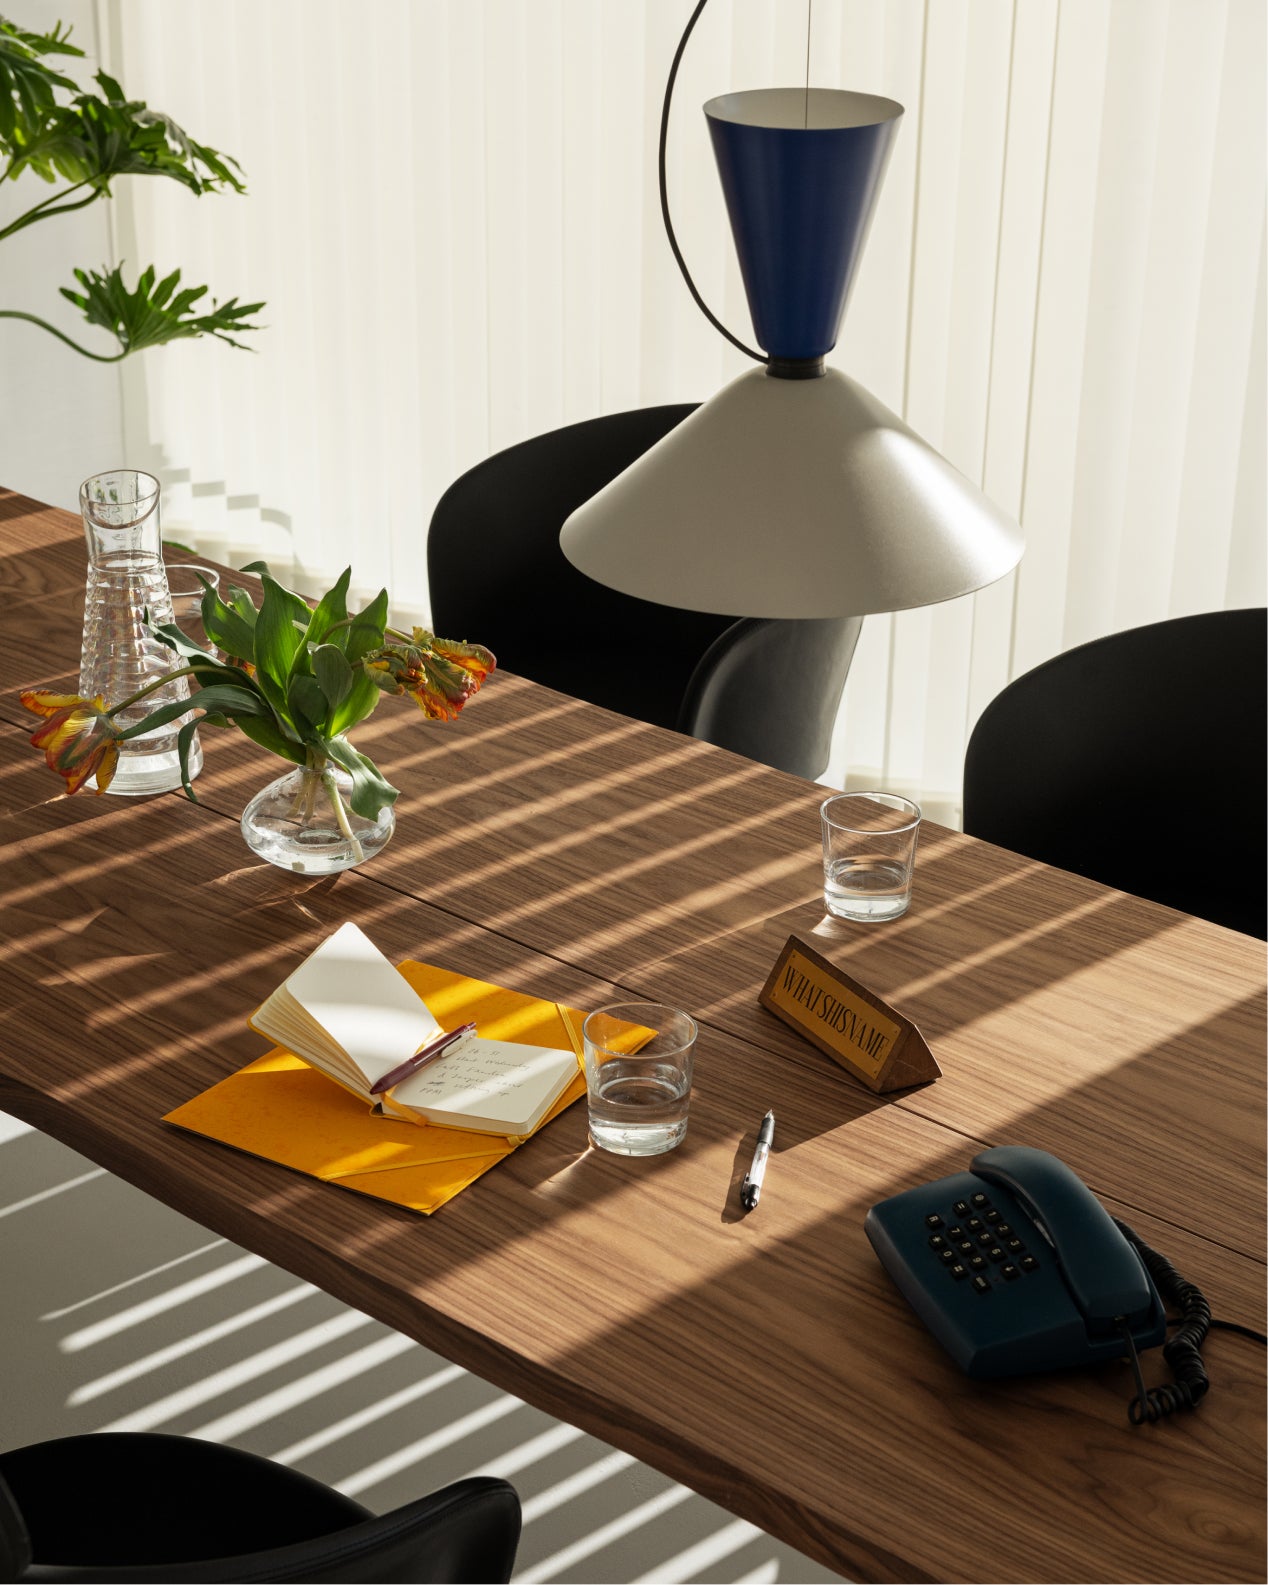 Hem - A dining scene featuring Alphabeta Pendant Light, Bookmatch Table and Kendo Chairs.